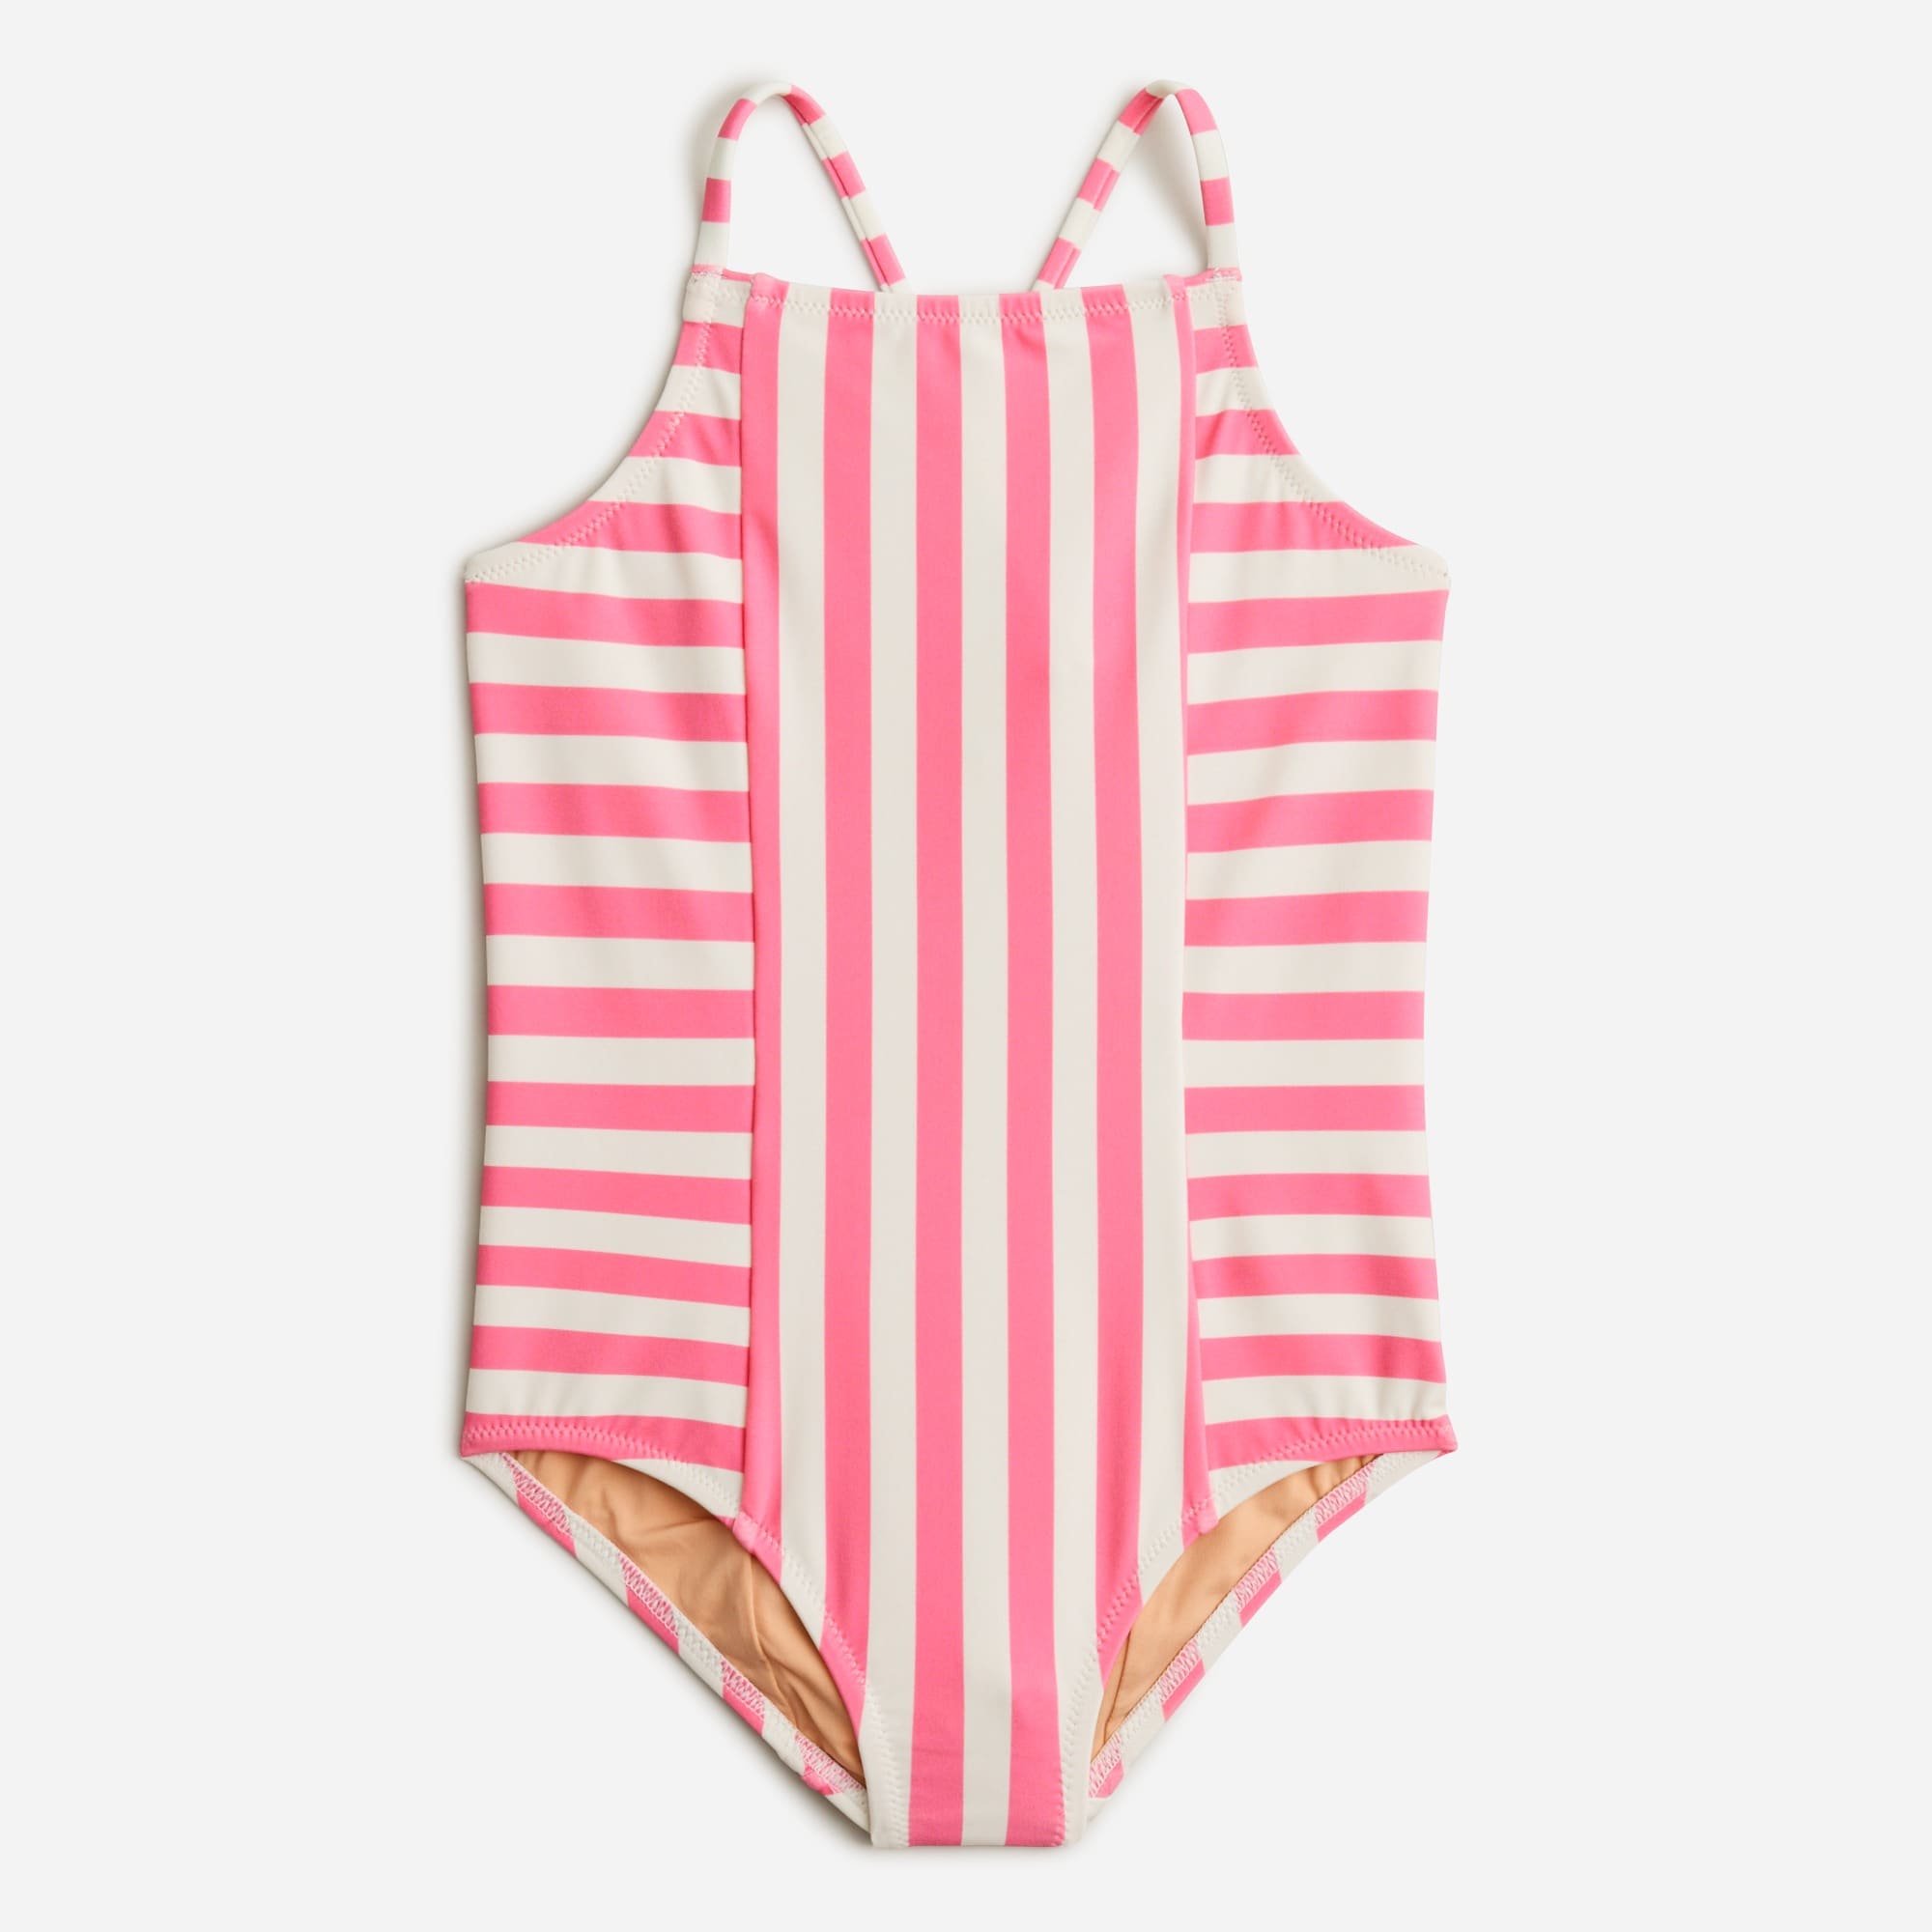  Girls' paneled one-piece swimsuit with UPF 50+